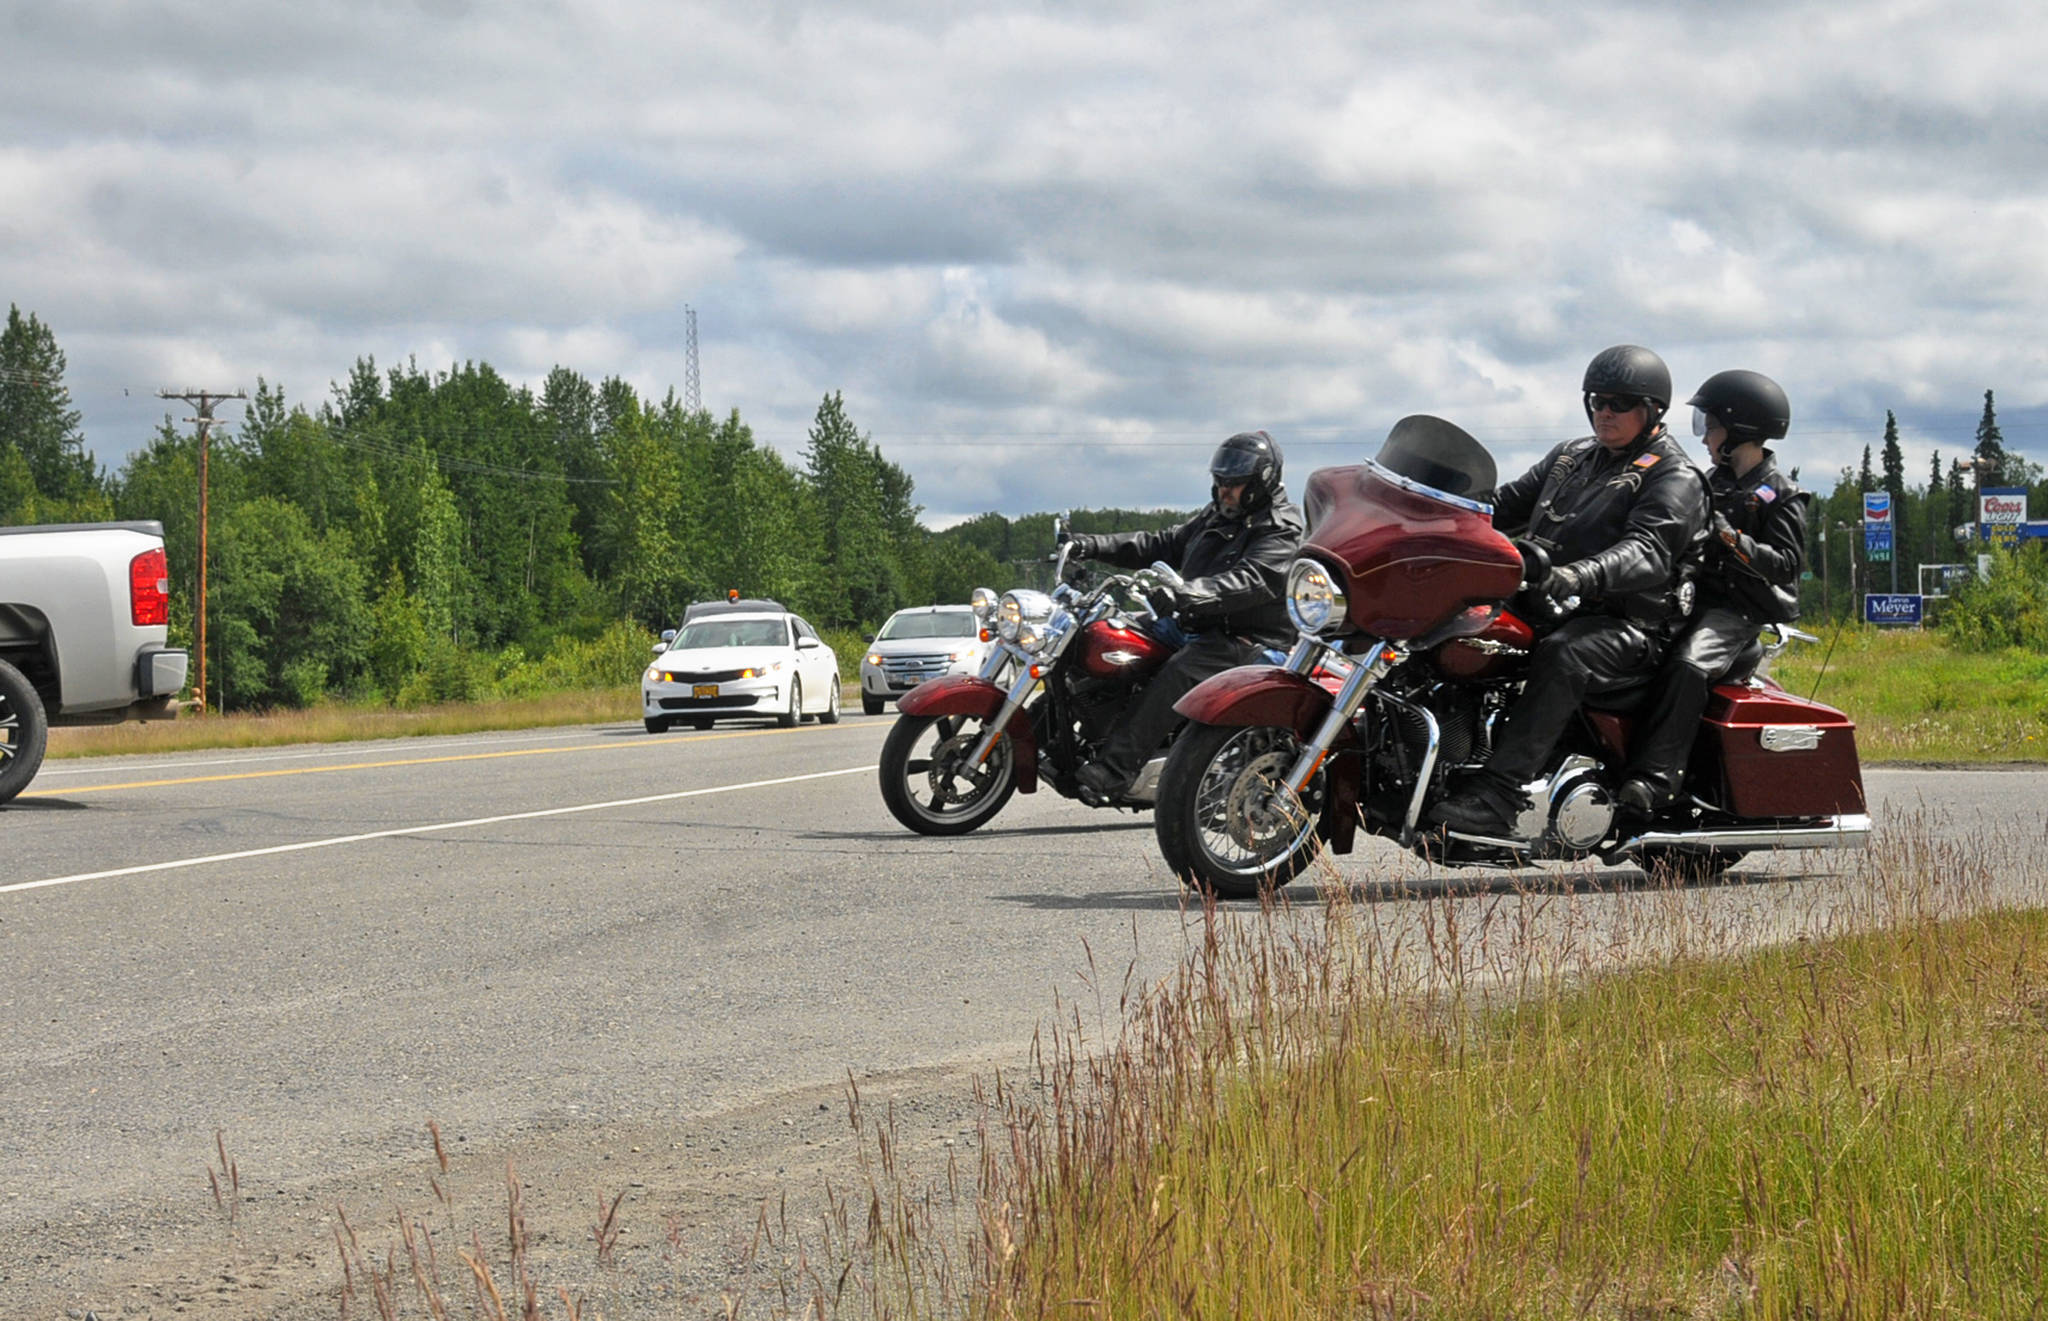 Motorcyclists take off as part of a procession to Travis Stubblefield’s memorial service from the driveway of the Harley-Davidson Motorcycles store on Saturday, June 30, 2018 in Soldotna, Alaska. Stubblefield, a lifelong resident of the Soldotna area, was killed June 21 in a conflict in Kasilof. Alaska State Troopers are investigating the circumstances of his death, though no charges have yet been filed. (Photo by Elizabeth Earl/Peninsula Clarion)